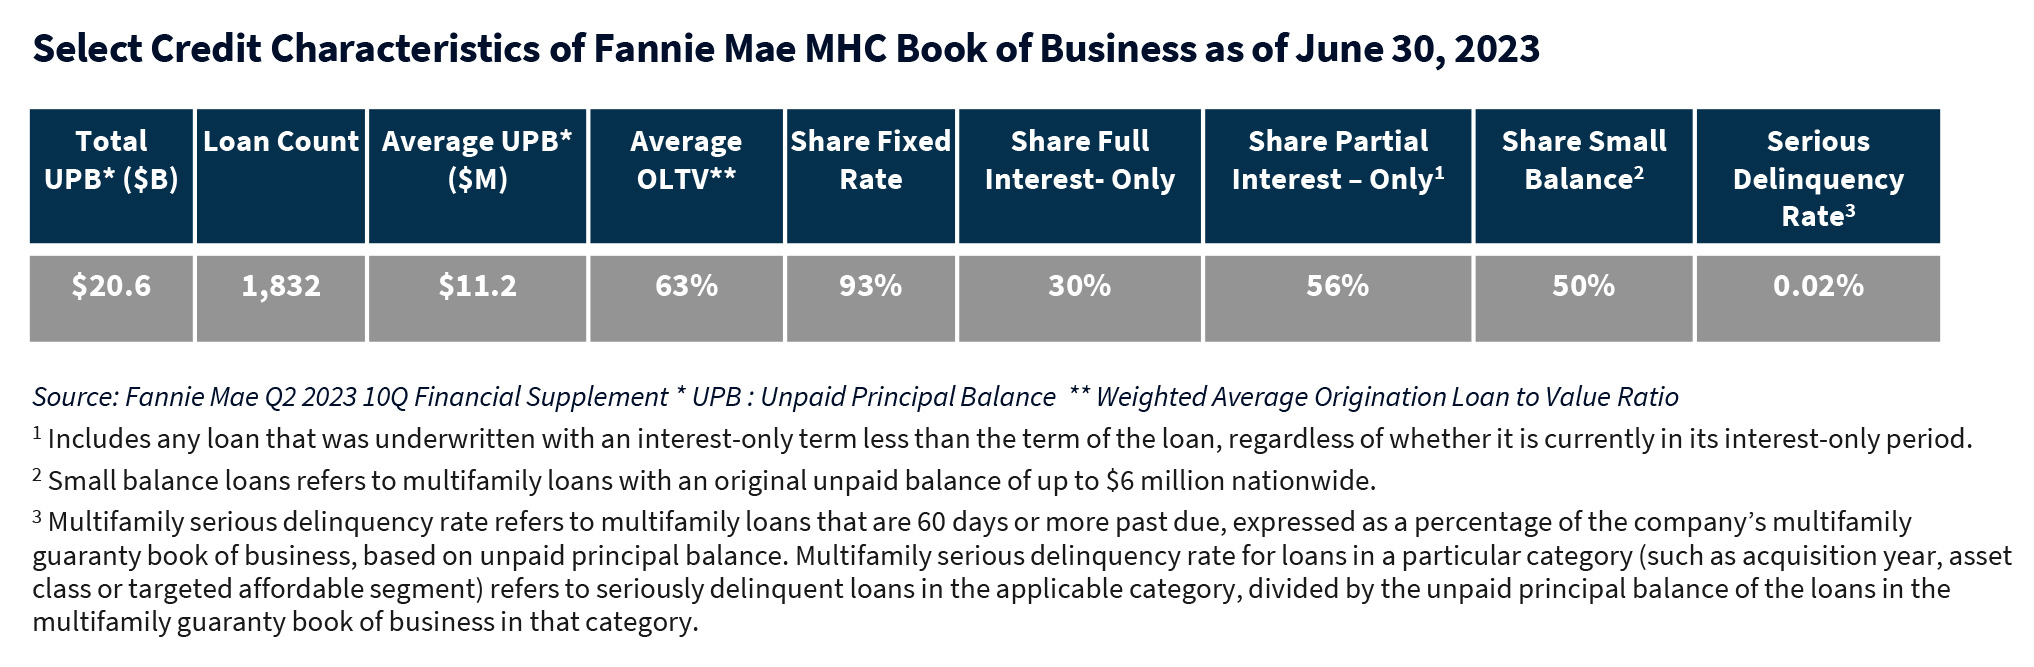 Select Credit Characteristics of Fannie Mae MHC Book of Business as of June 30, 2023